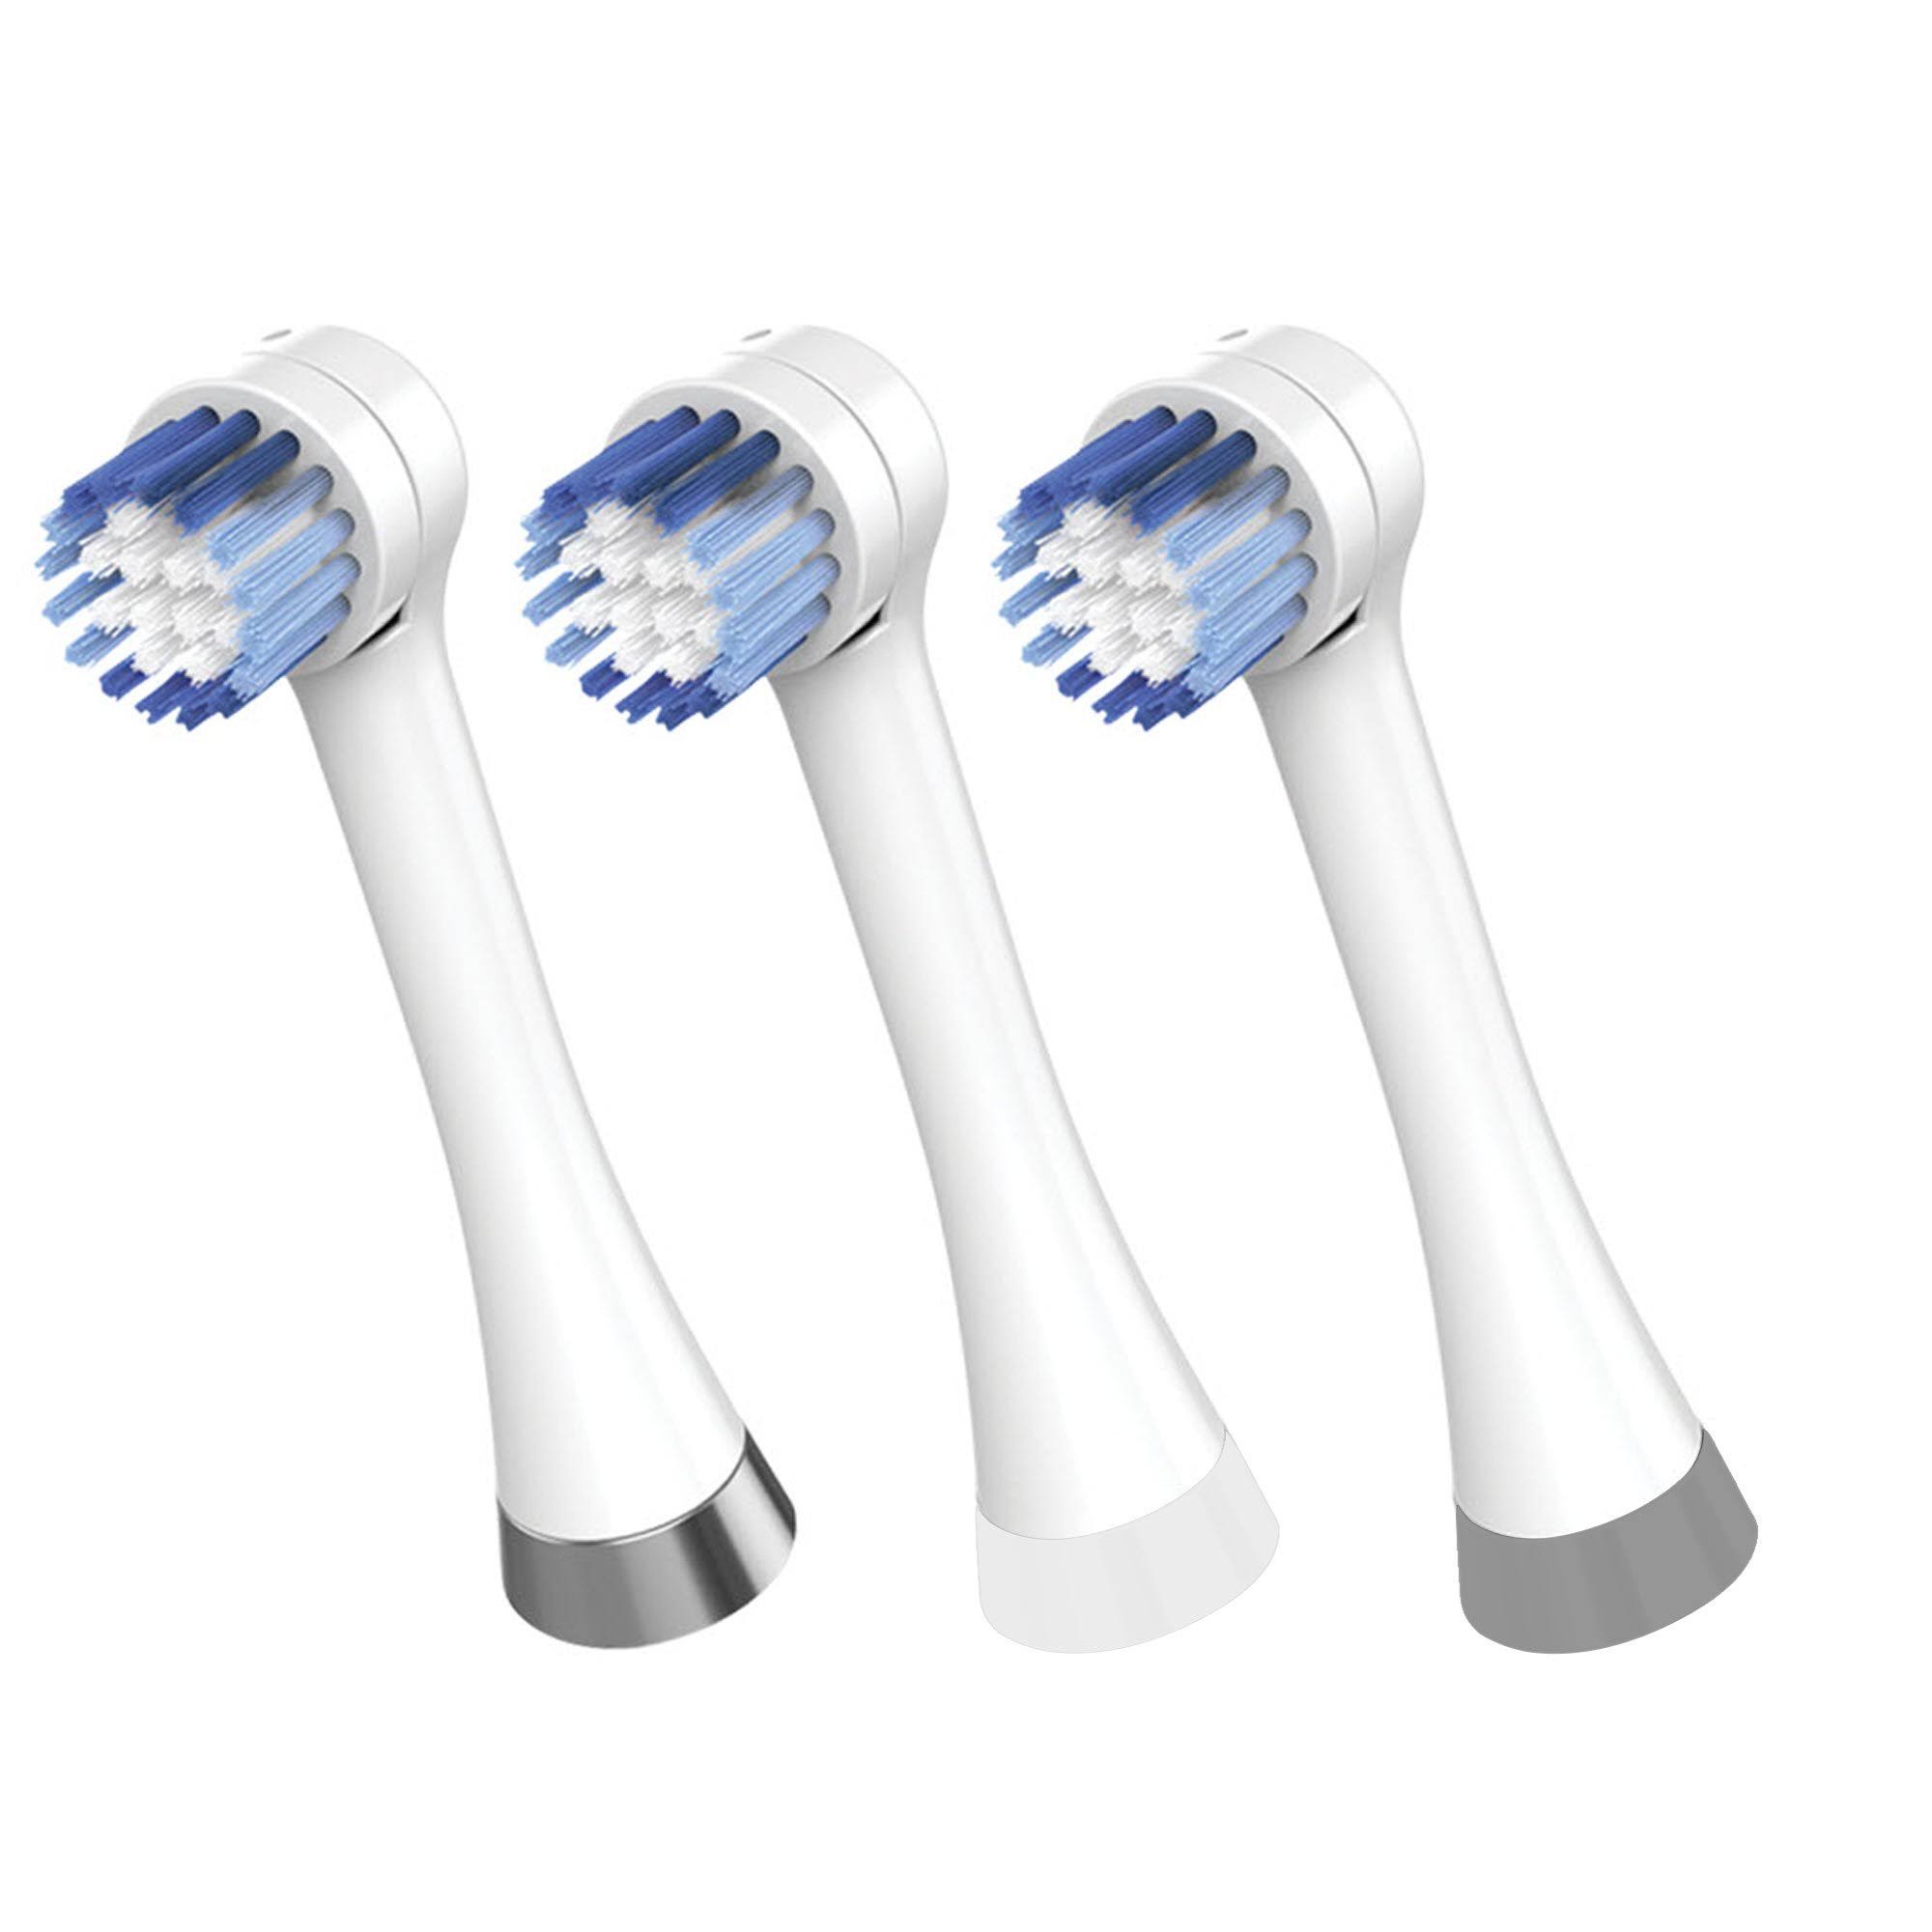 Waterpik Oscillating Complete Care Replacement Brush Heads - White, 3ct